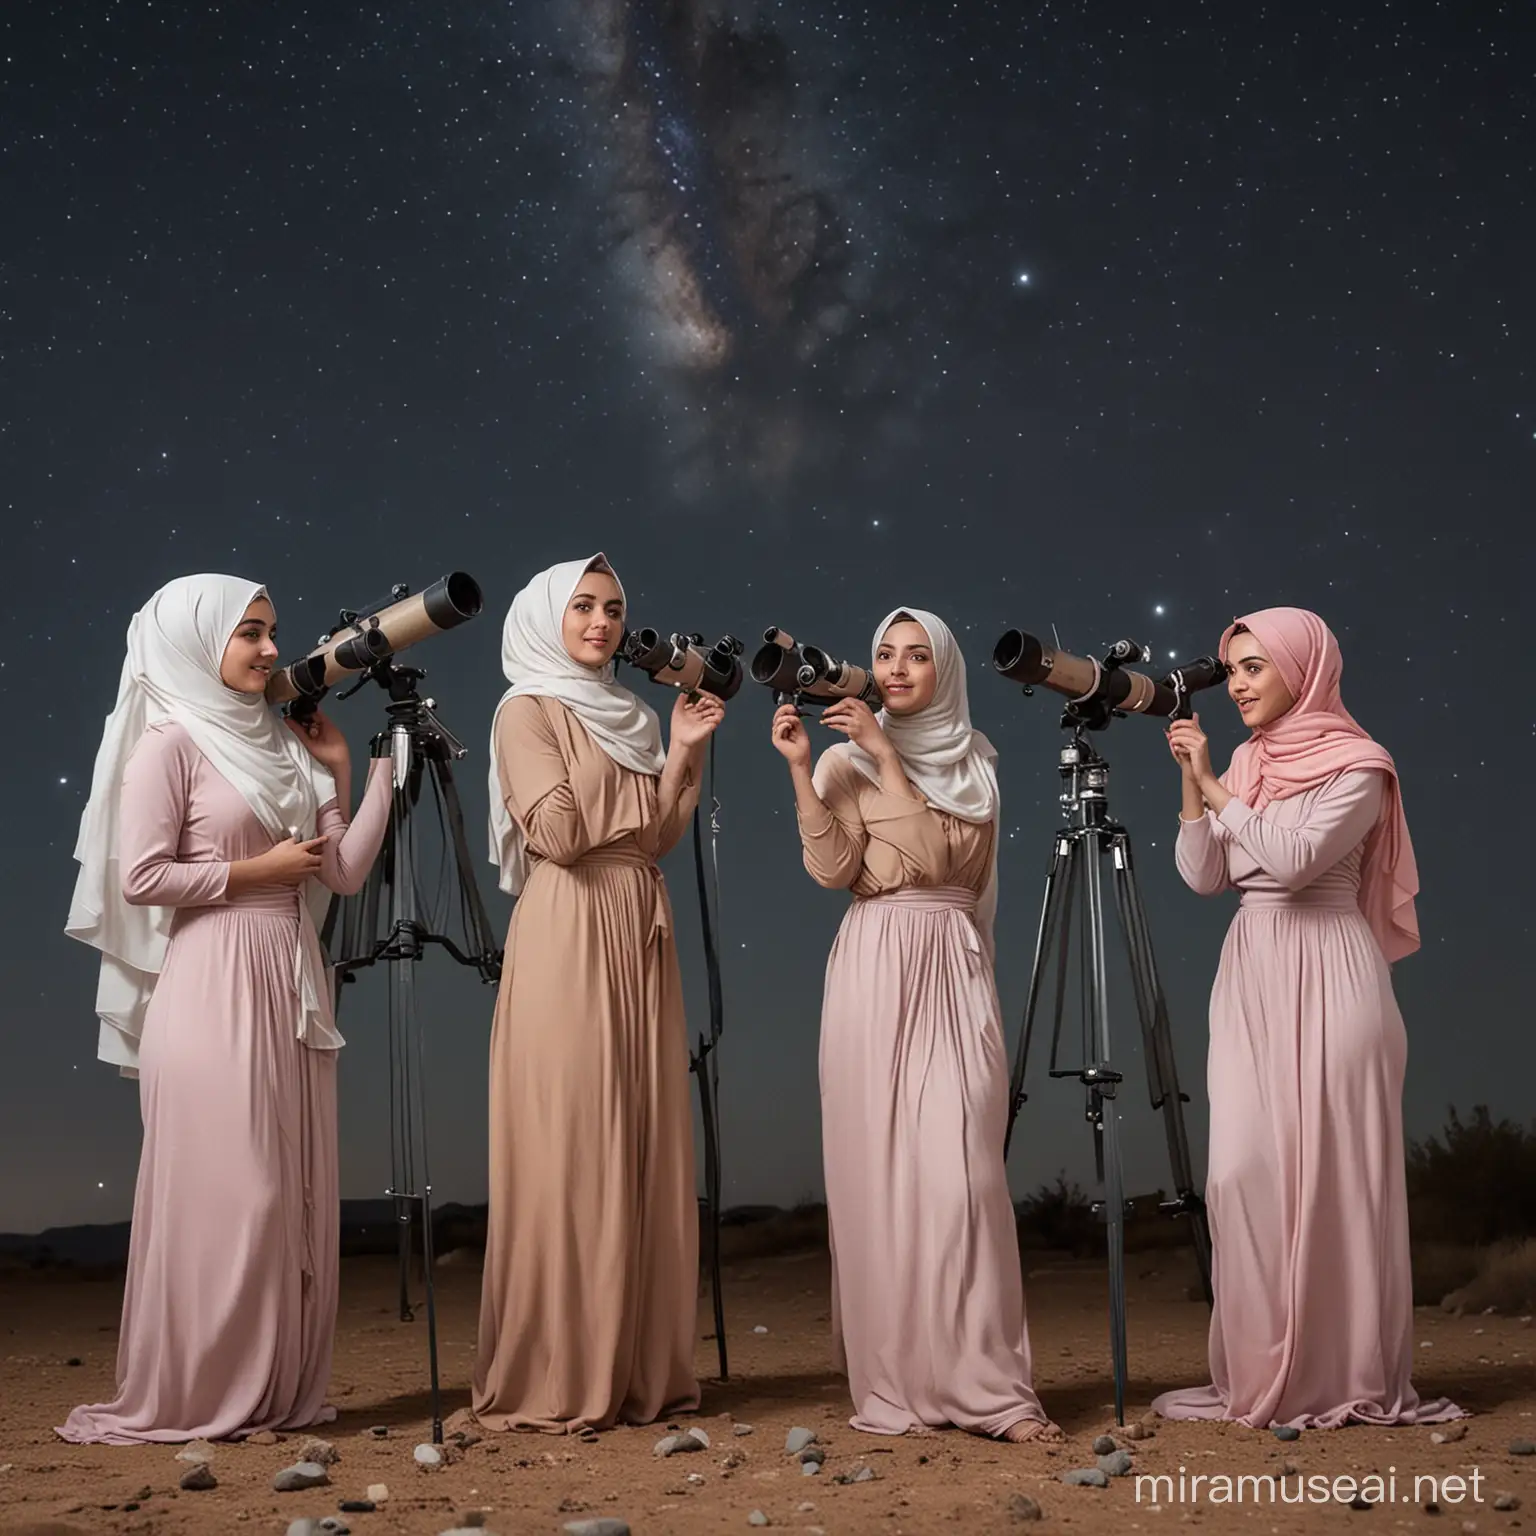 naked women wearing hijabs observing stars with telescope in the night